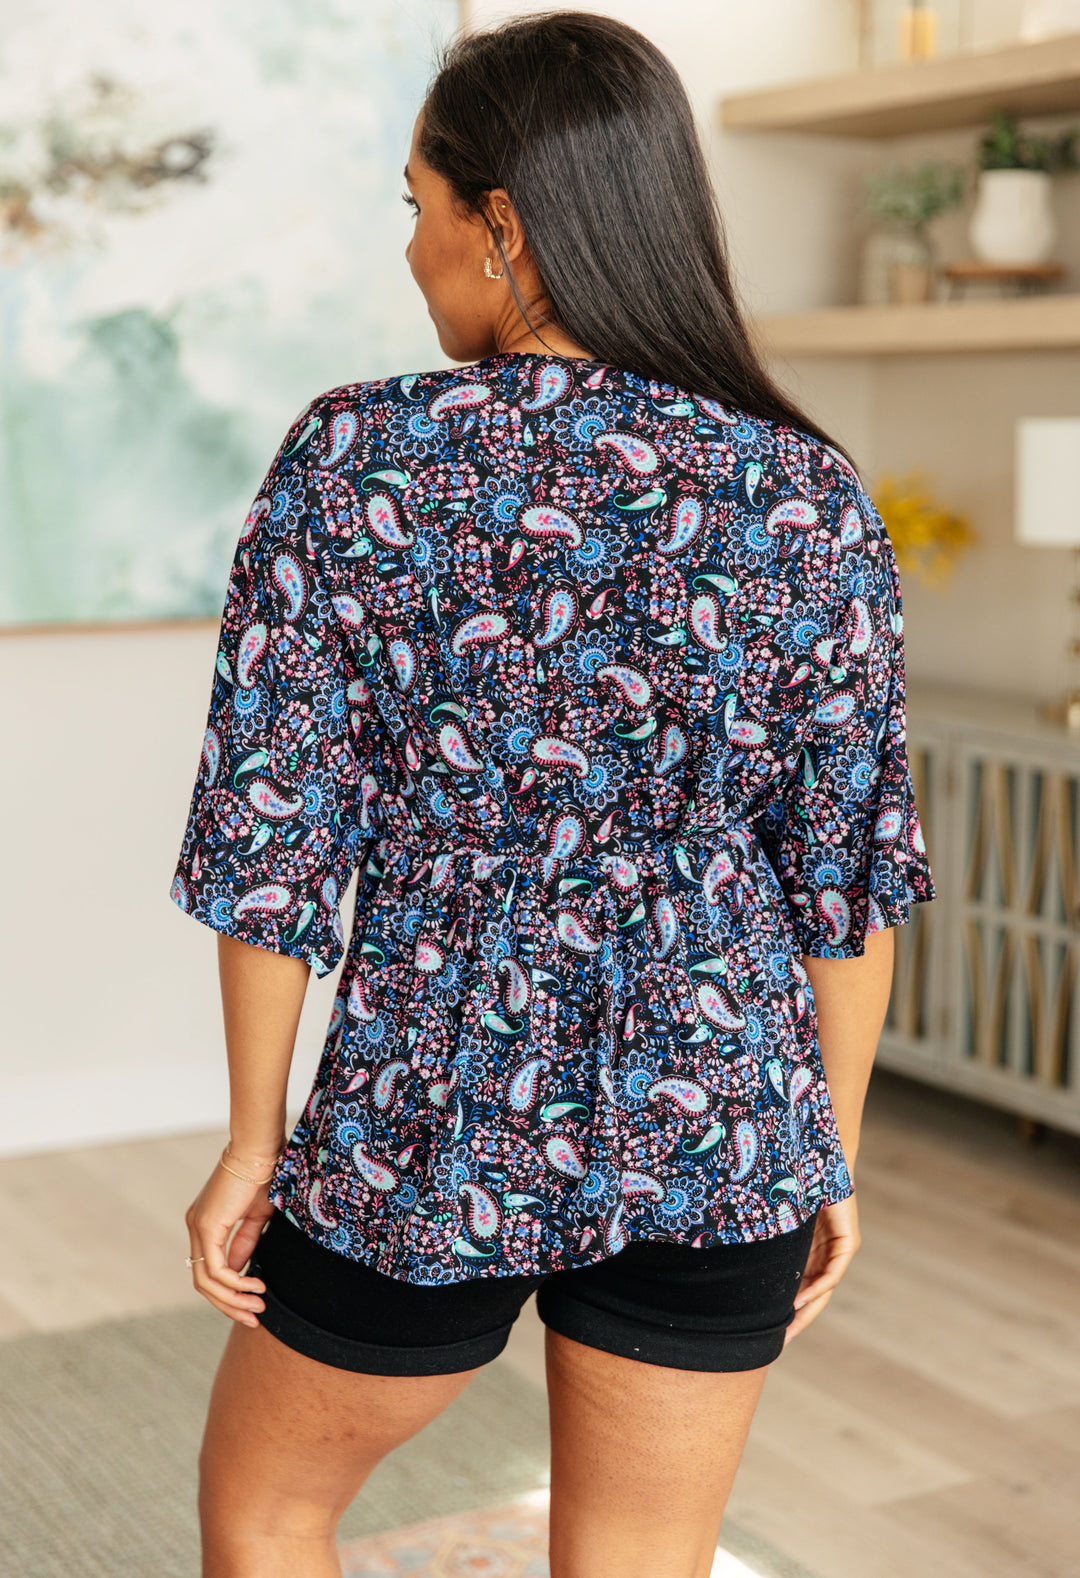 Dreamer Top in Black and Periwinkle Paisley-Long Sleeve Tops-Inspired by Justeen-Women's Clothing Boutique in Chicago, Illinois